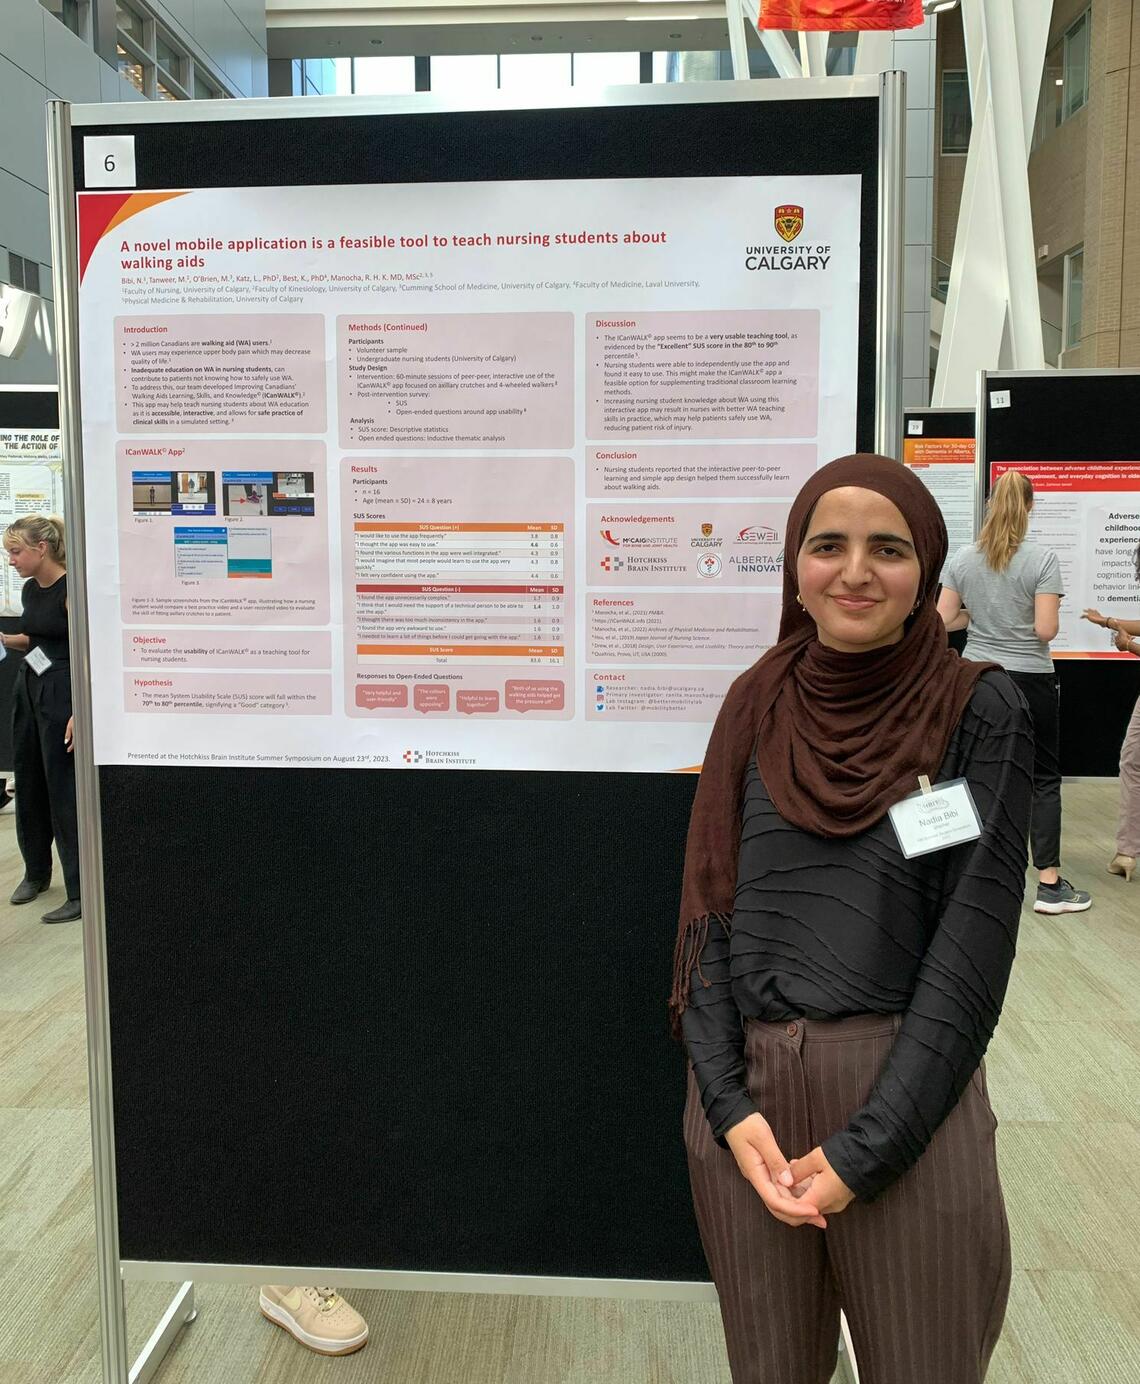 A woman in a hijab stands in front of a presentation board